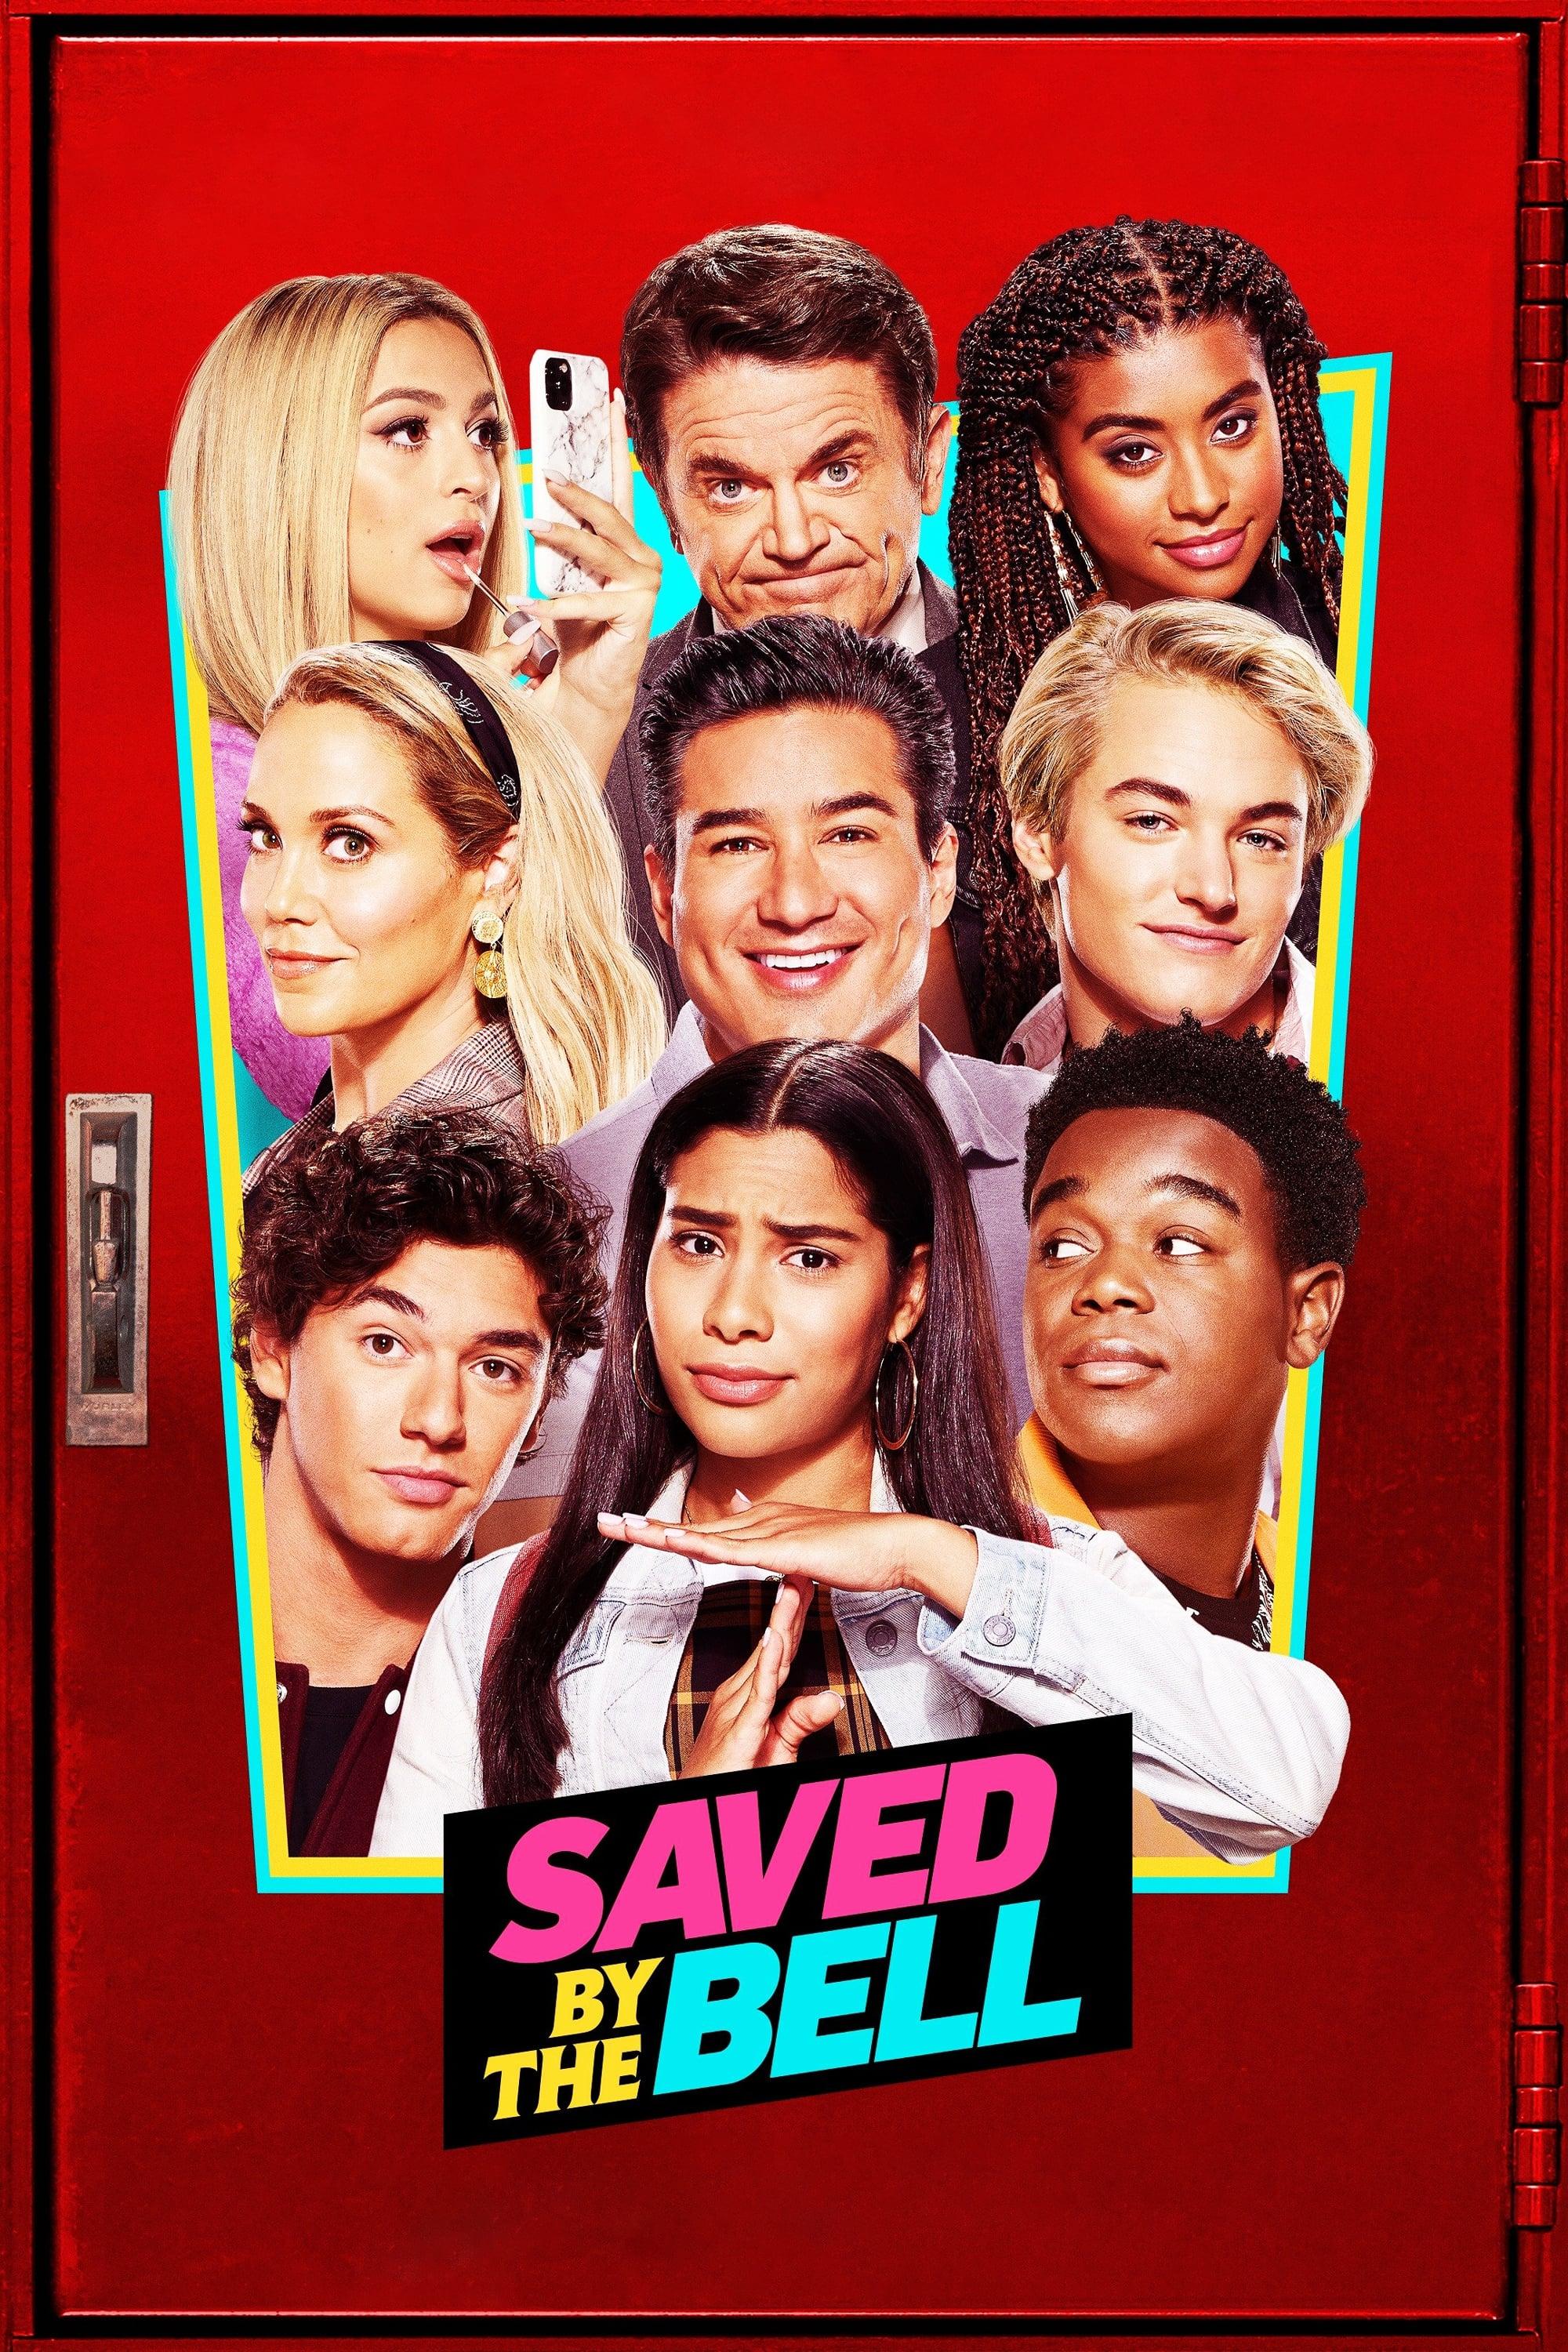 Saved by the Bell poster